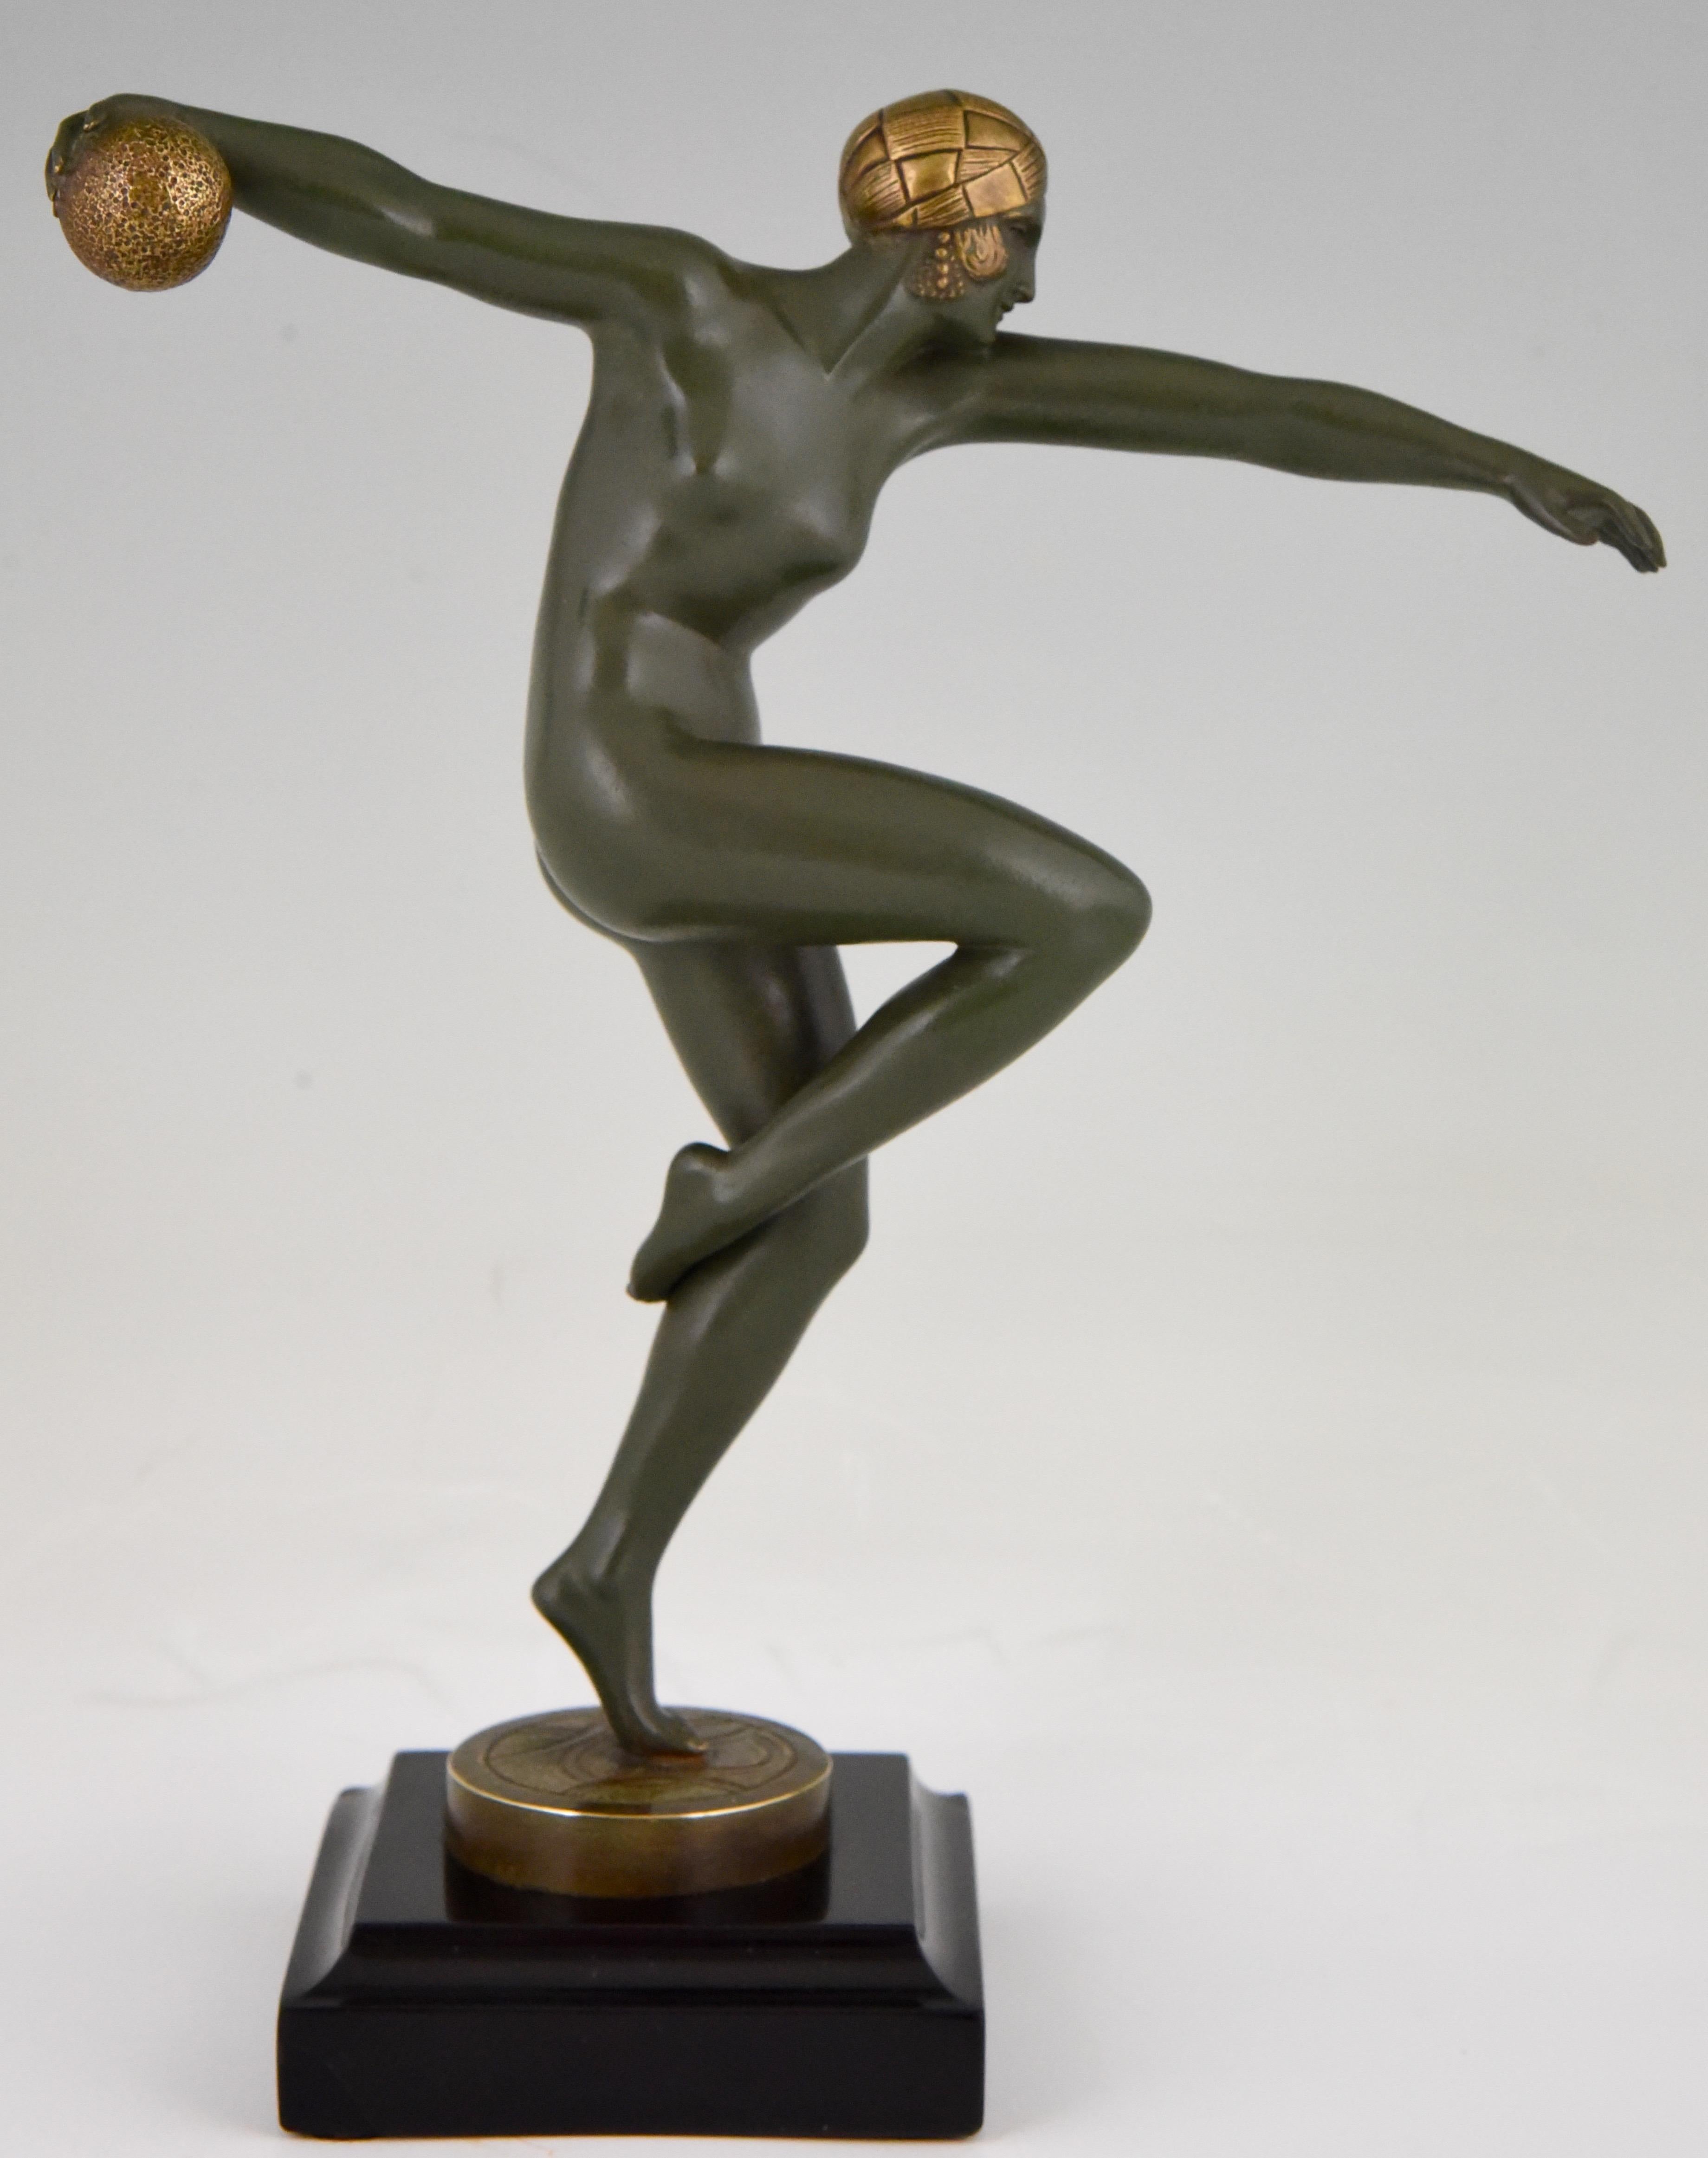 Art Deco bronze sculpture of a nude dancer with ball signed by Maurice Guiraud-Rivière. Patinated bronze on a Belgian black marble base, France, 1920.

This sculpture is illustrated in the 3 following books:
“Art Deco and other figures” by Brian